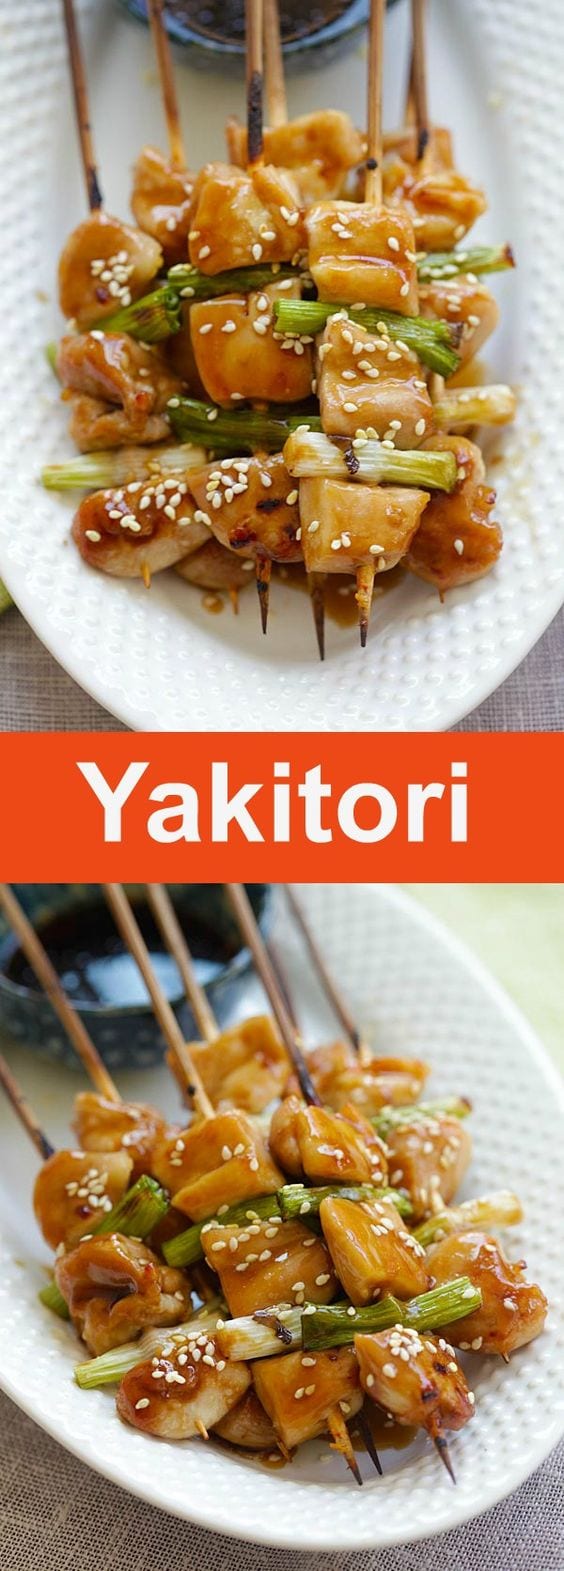 Yakitori - Yakitori is Japanese grilled chicken skewers. Learn how to make them with this easy Yakitori recipe that takes only 20 mins | rasamalaysia.com